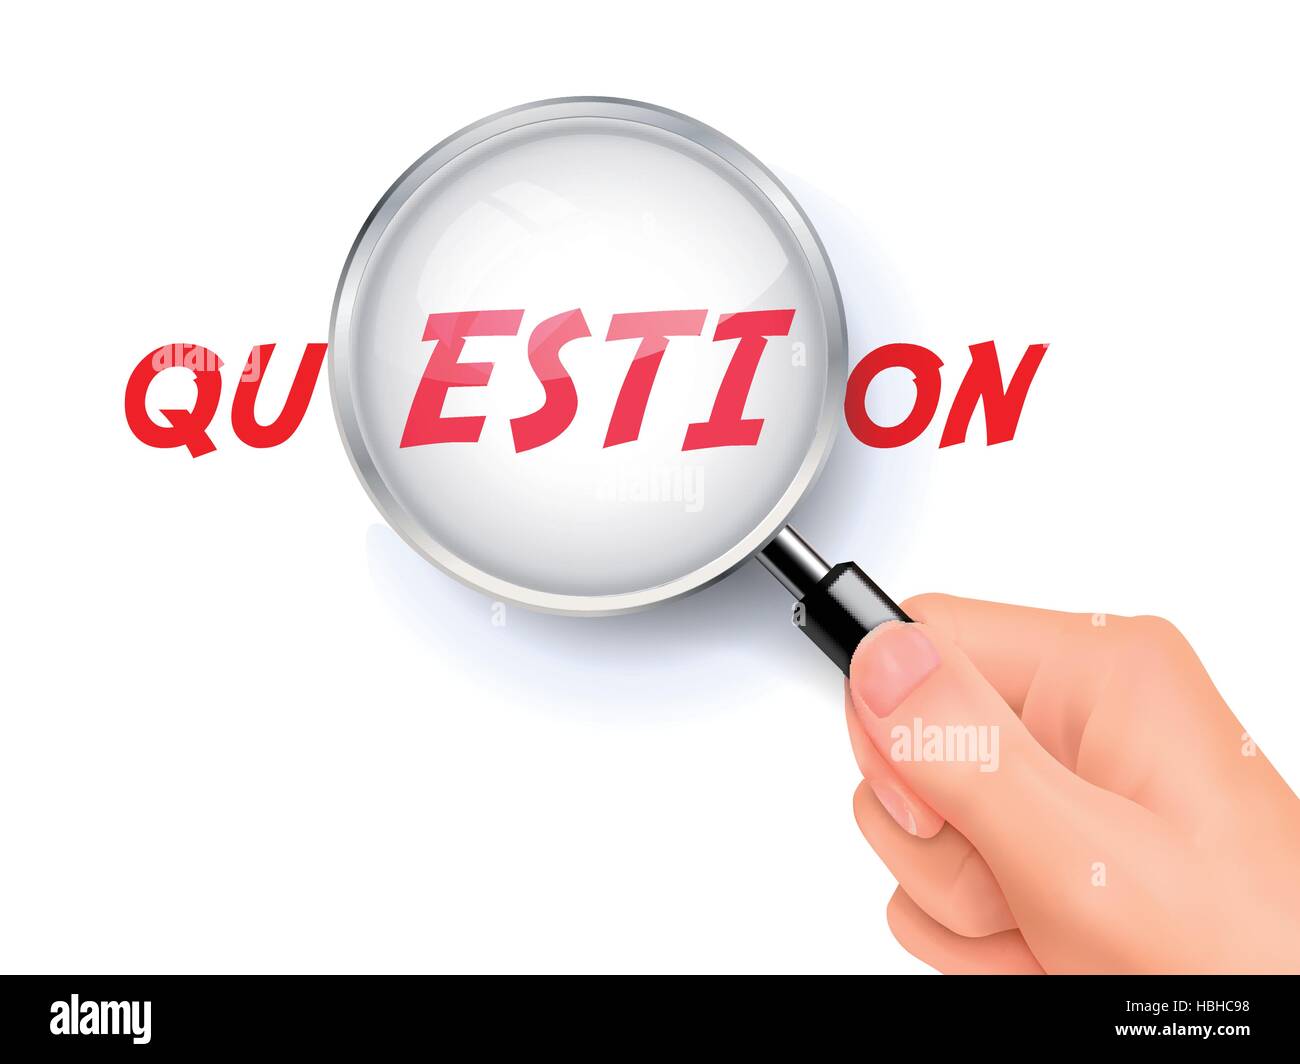 question word showing through magnifying glass held by hand Stock Vector